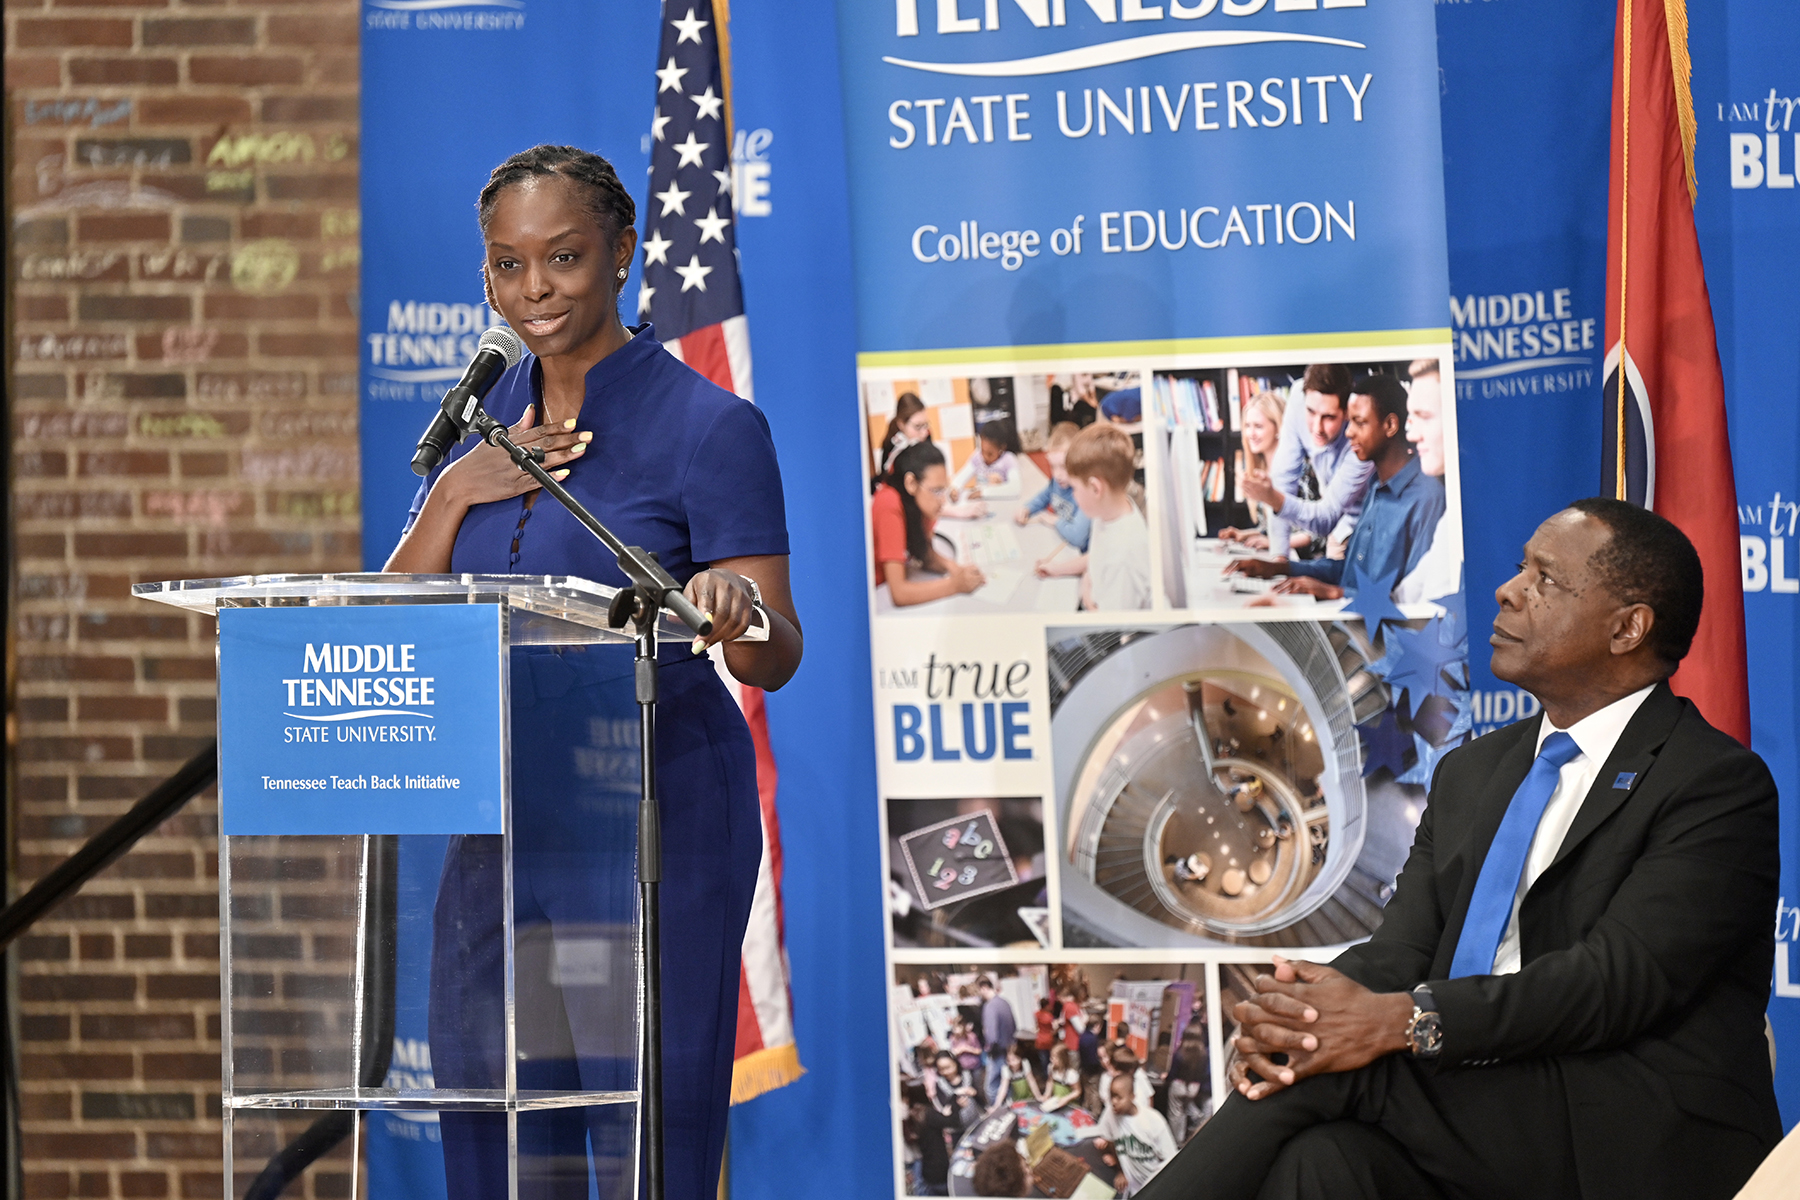 Neporcha Cone, left, the new College of Education dean for Middle Tennessee State University, expresses her excitement about MTSU’s Tennessee Teach Back Initiative — an effort to create a teacher pipeline to high-needs school districts — at a signing ceremony between the university and initiative partner the State Collaborative on Reforming Education, or SCORE, held Monday, May 8, at Homer Pittard Campus School in Murfreesboro, Tenn. At right is MTSU President Sidney A. McPhee. (MTSU photo by J. Intintoli)